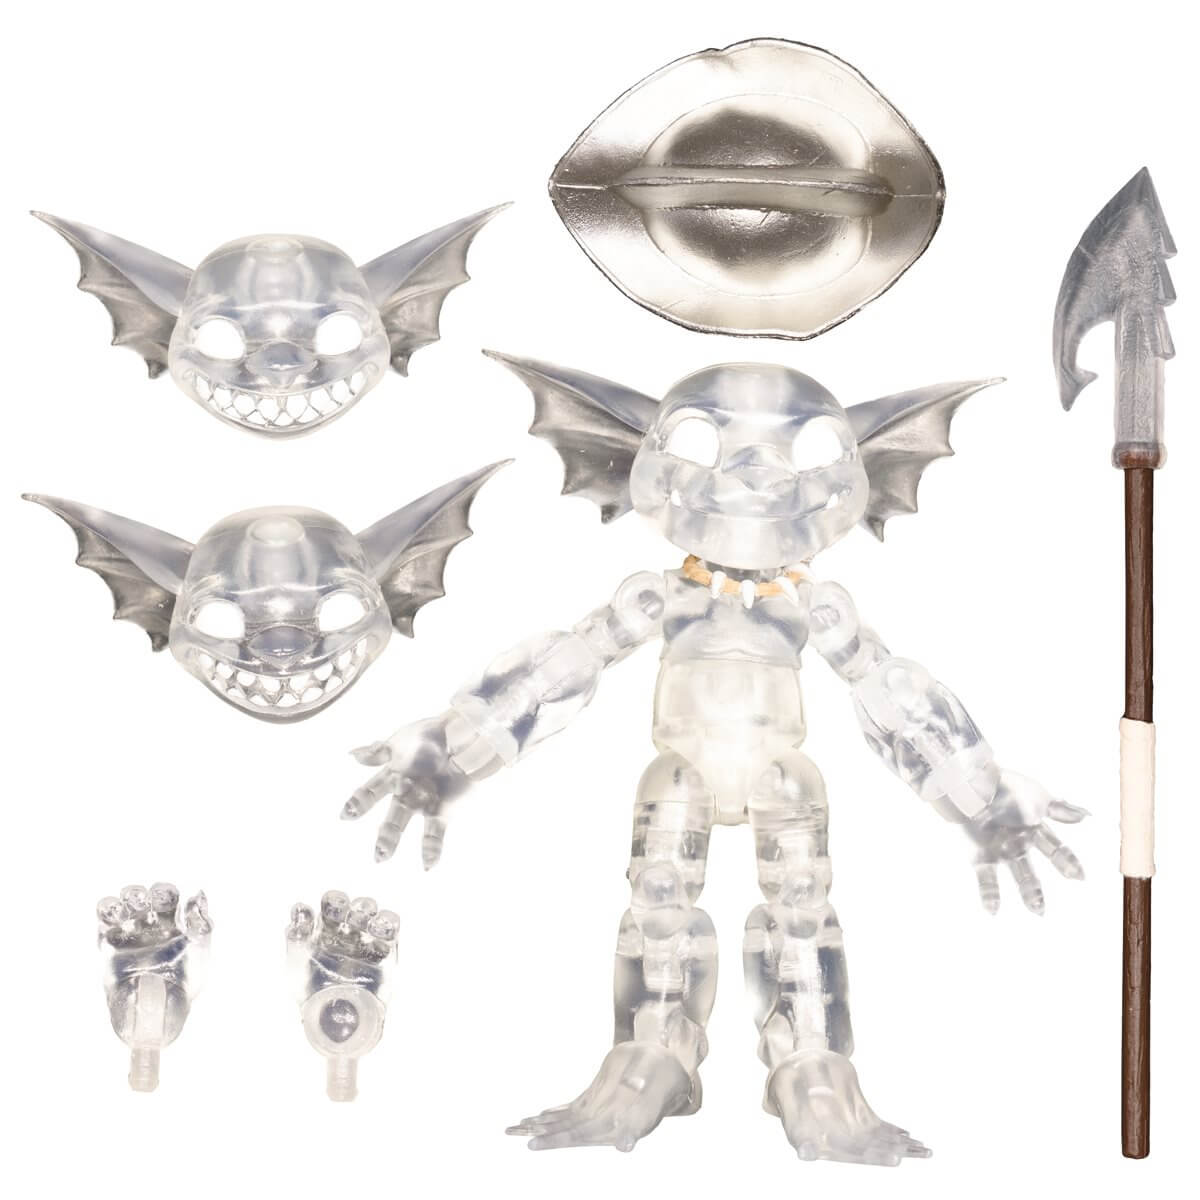 Plunderlings Drench with accessories Arctic Clear Variant 1:12 Scale Action Figure - Convention Exclusive 